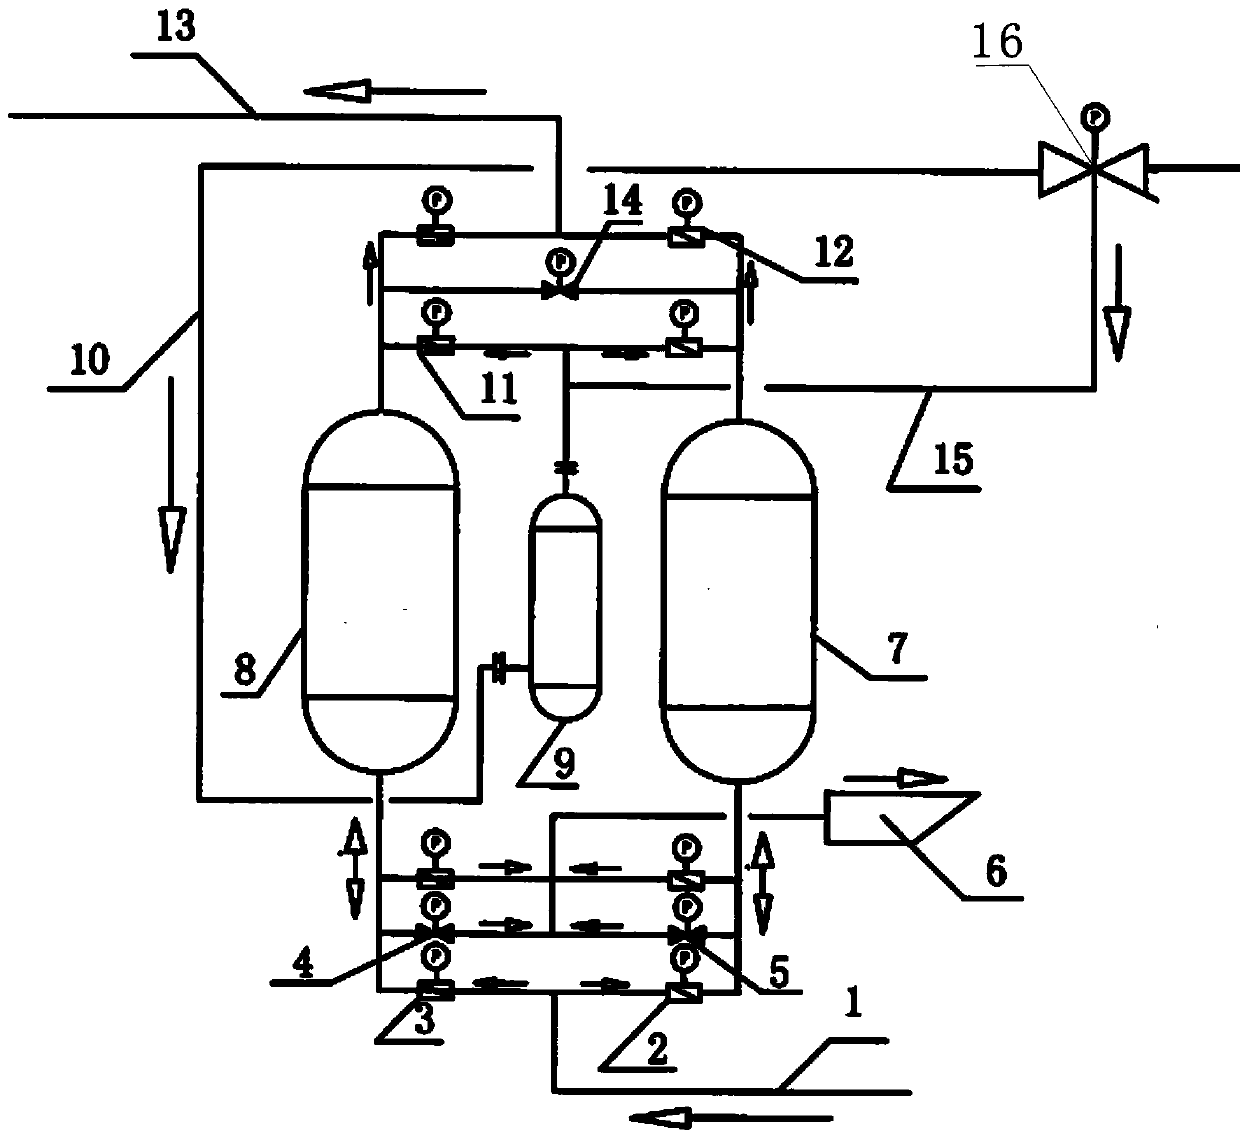 Pressure equalizing control method for air purifier